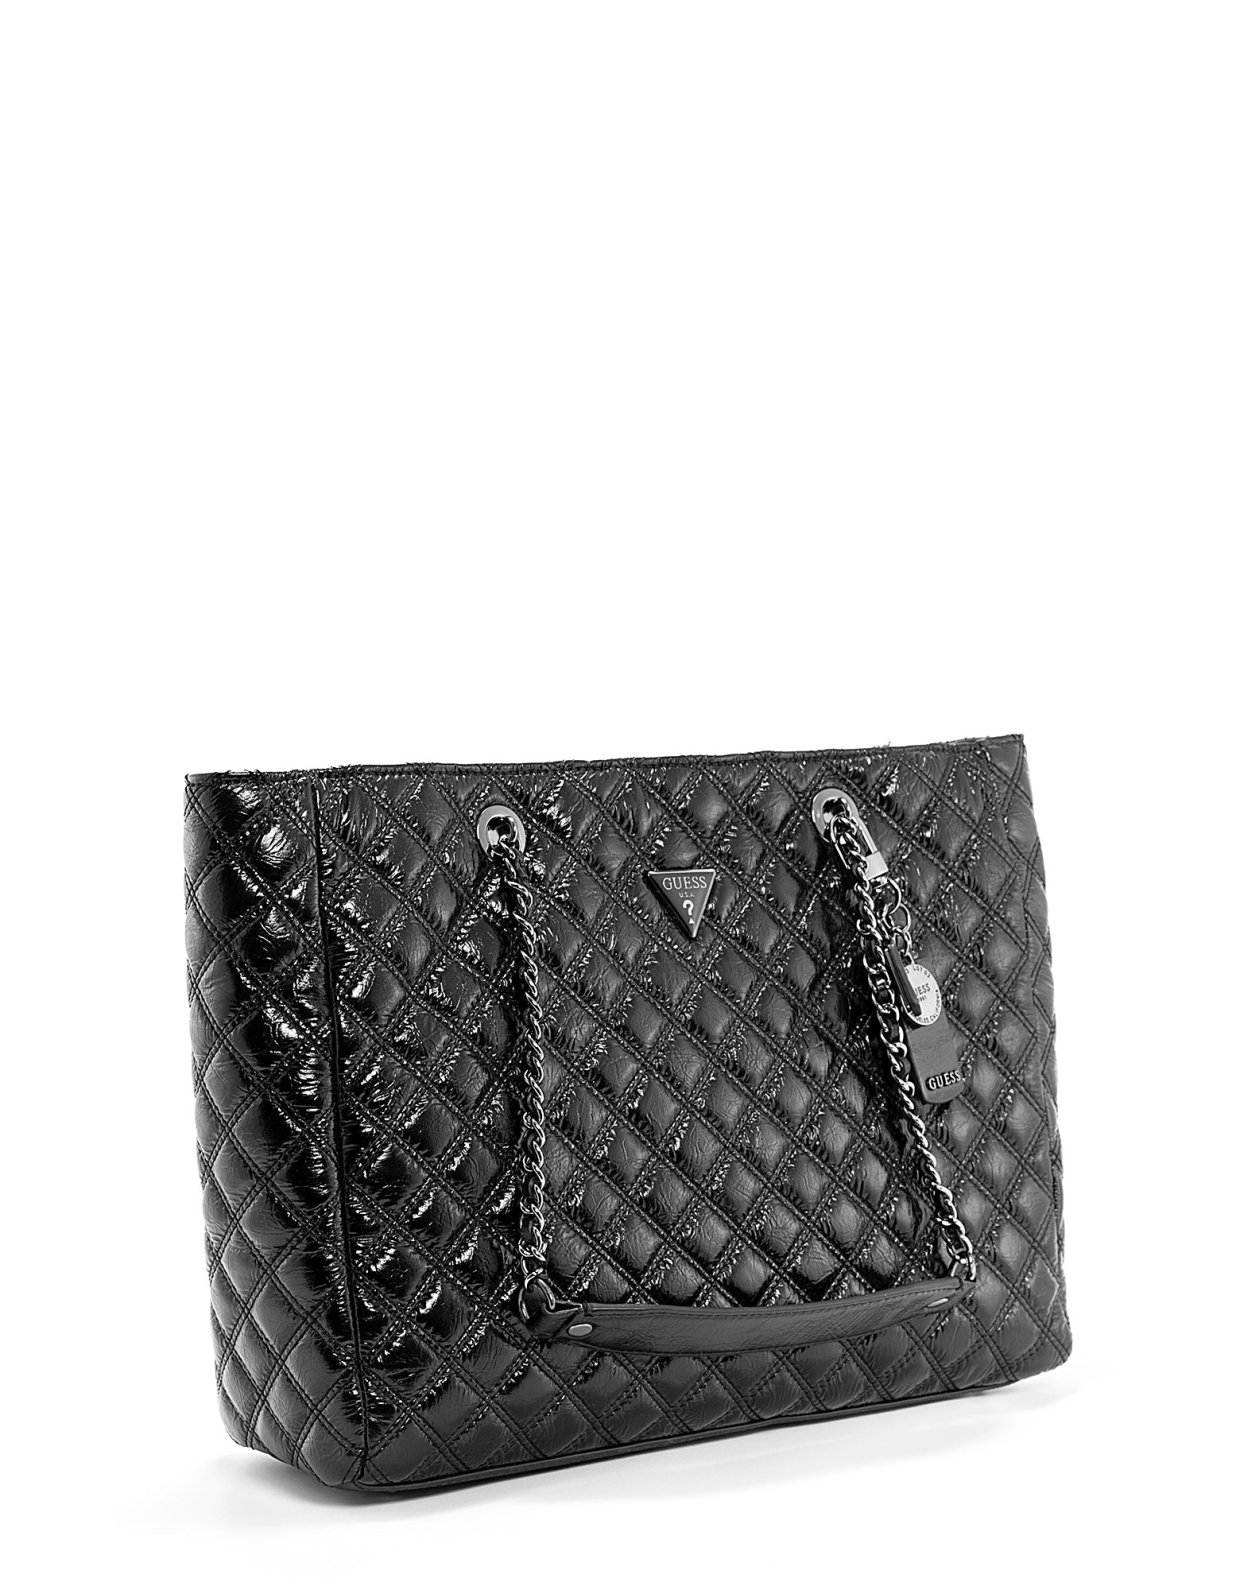 Guess Cessily quilted tote bag wrinkled black